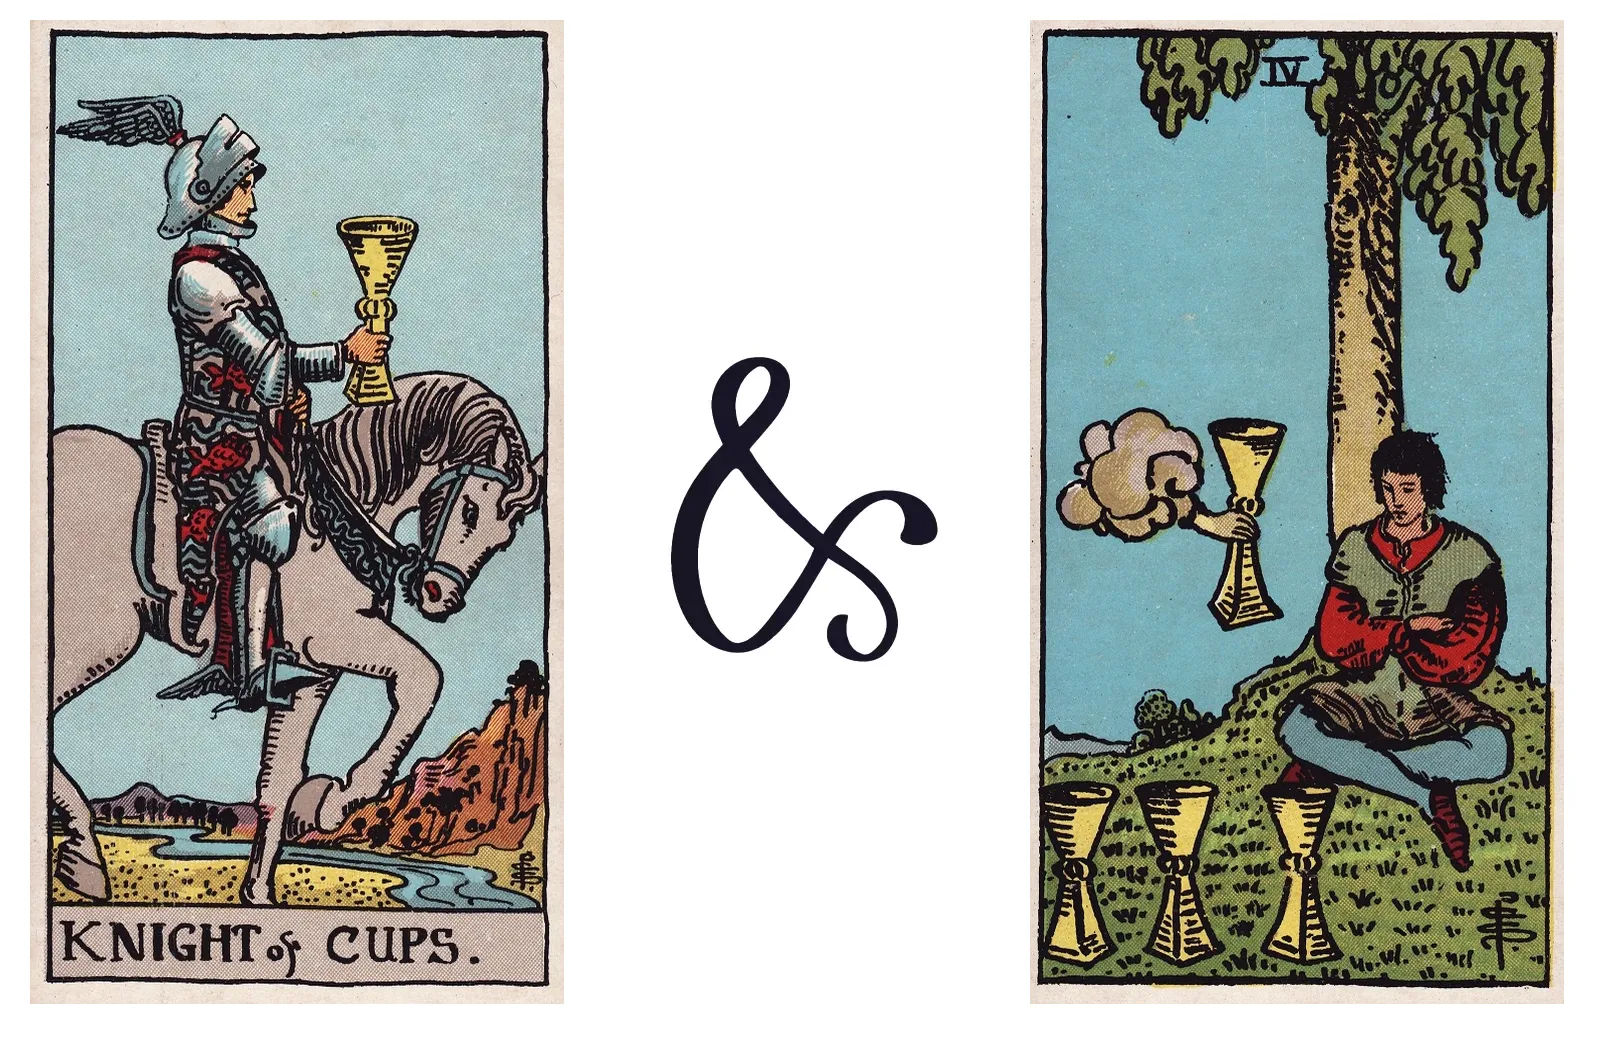 Knight of Cups and Four of Cups